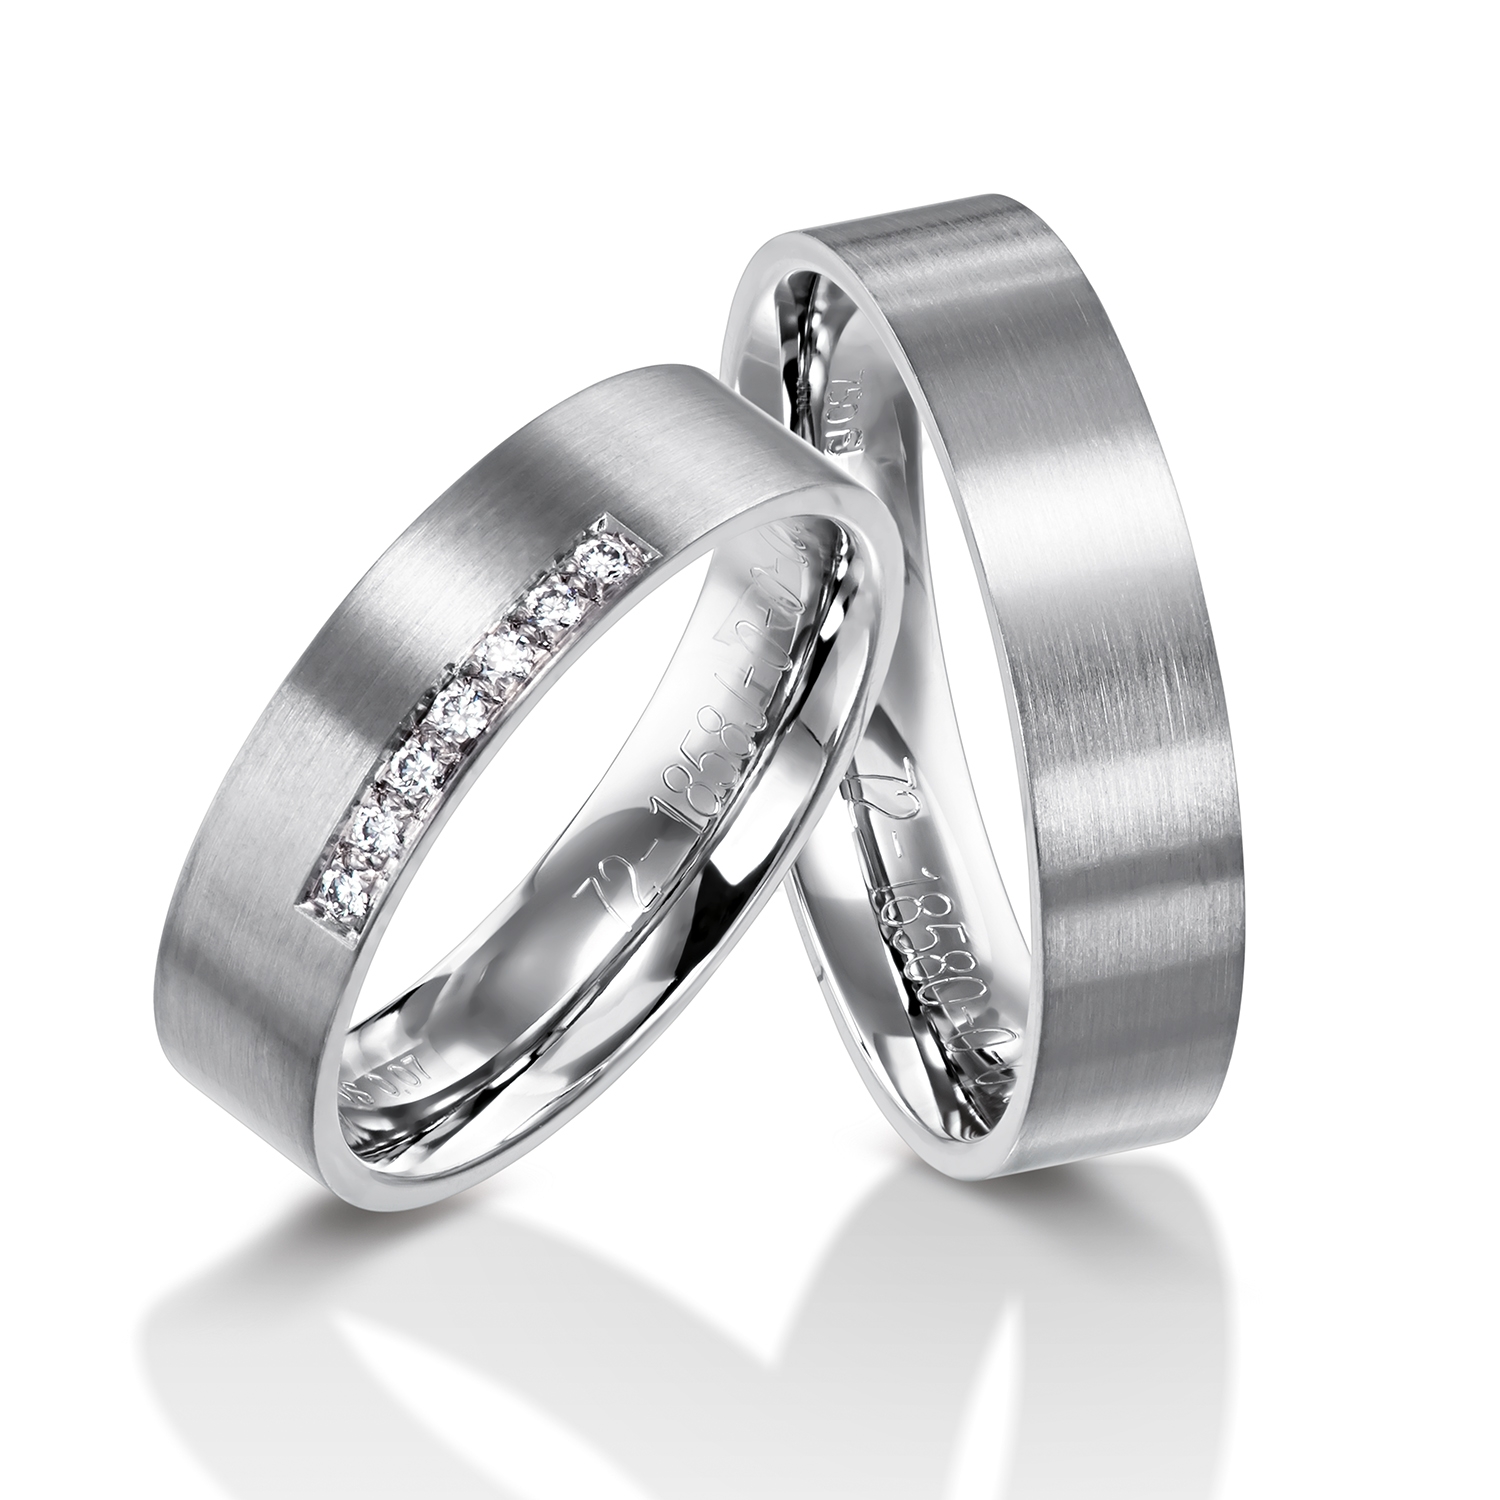 wedding bands, wedding rings, in gold, platinum, palladium, bicolor, with diamonds, Ringdividuell, individual